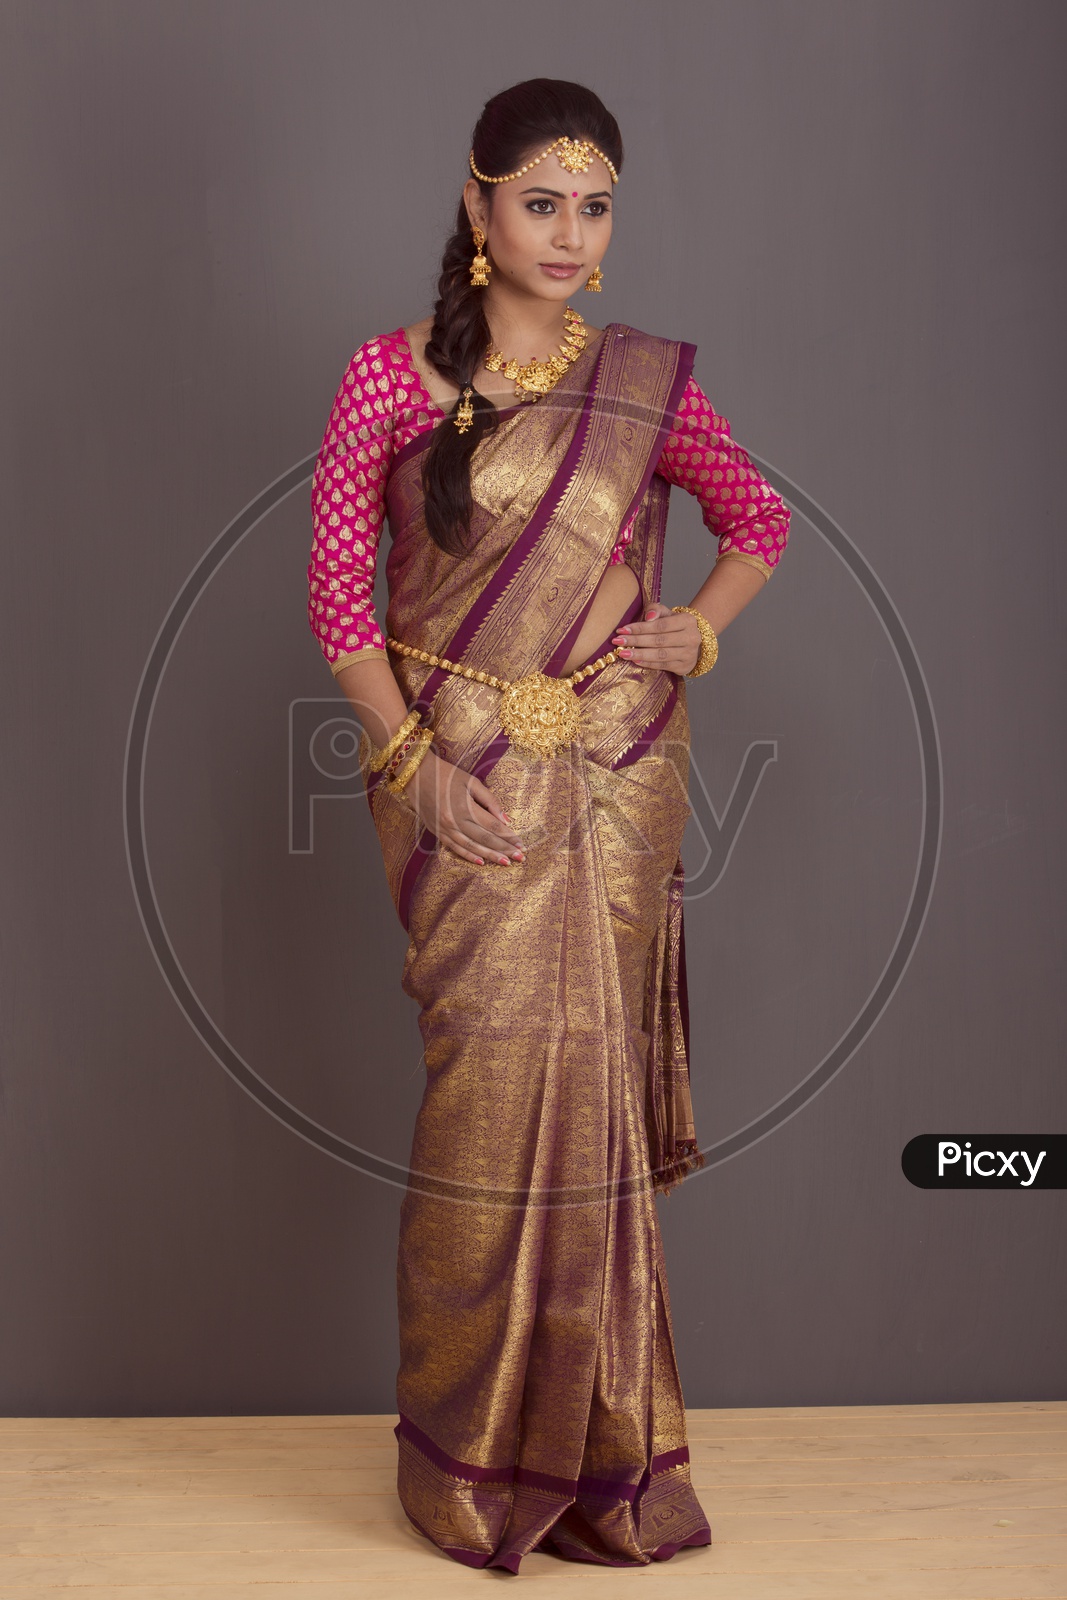 Indian bride dressed up in red saree portrait in Studio Lighting / Traditionally dressed up girl